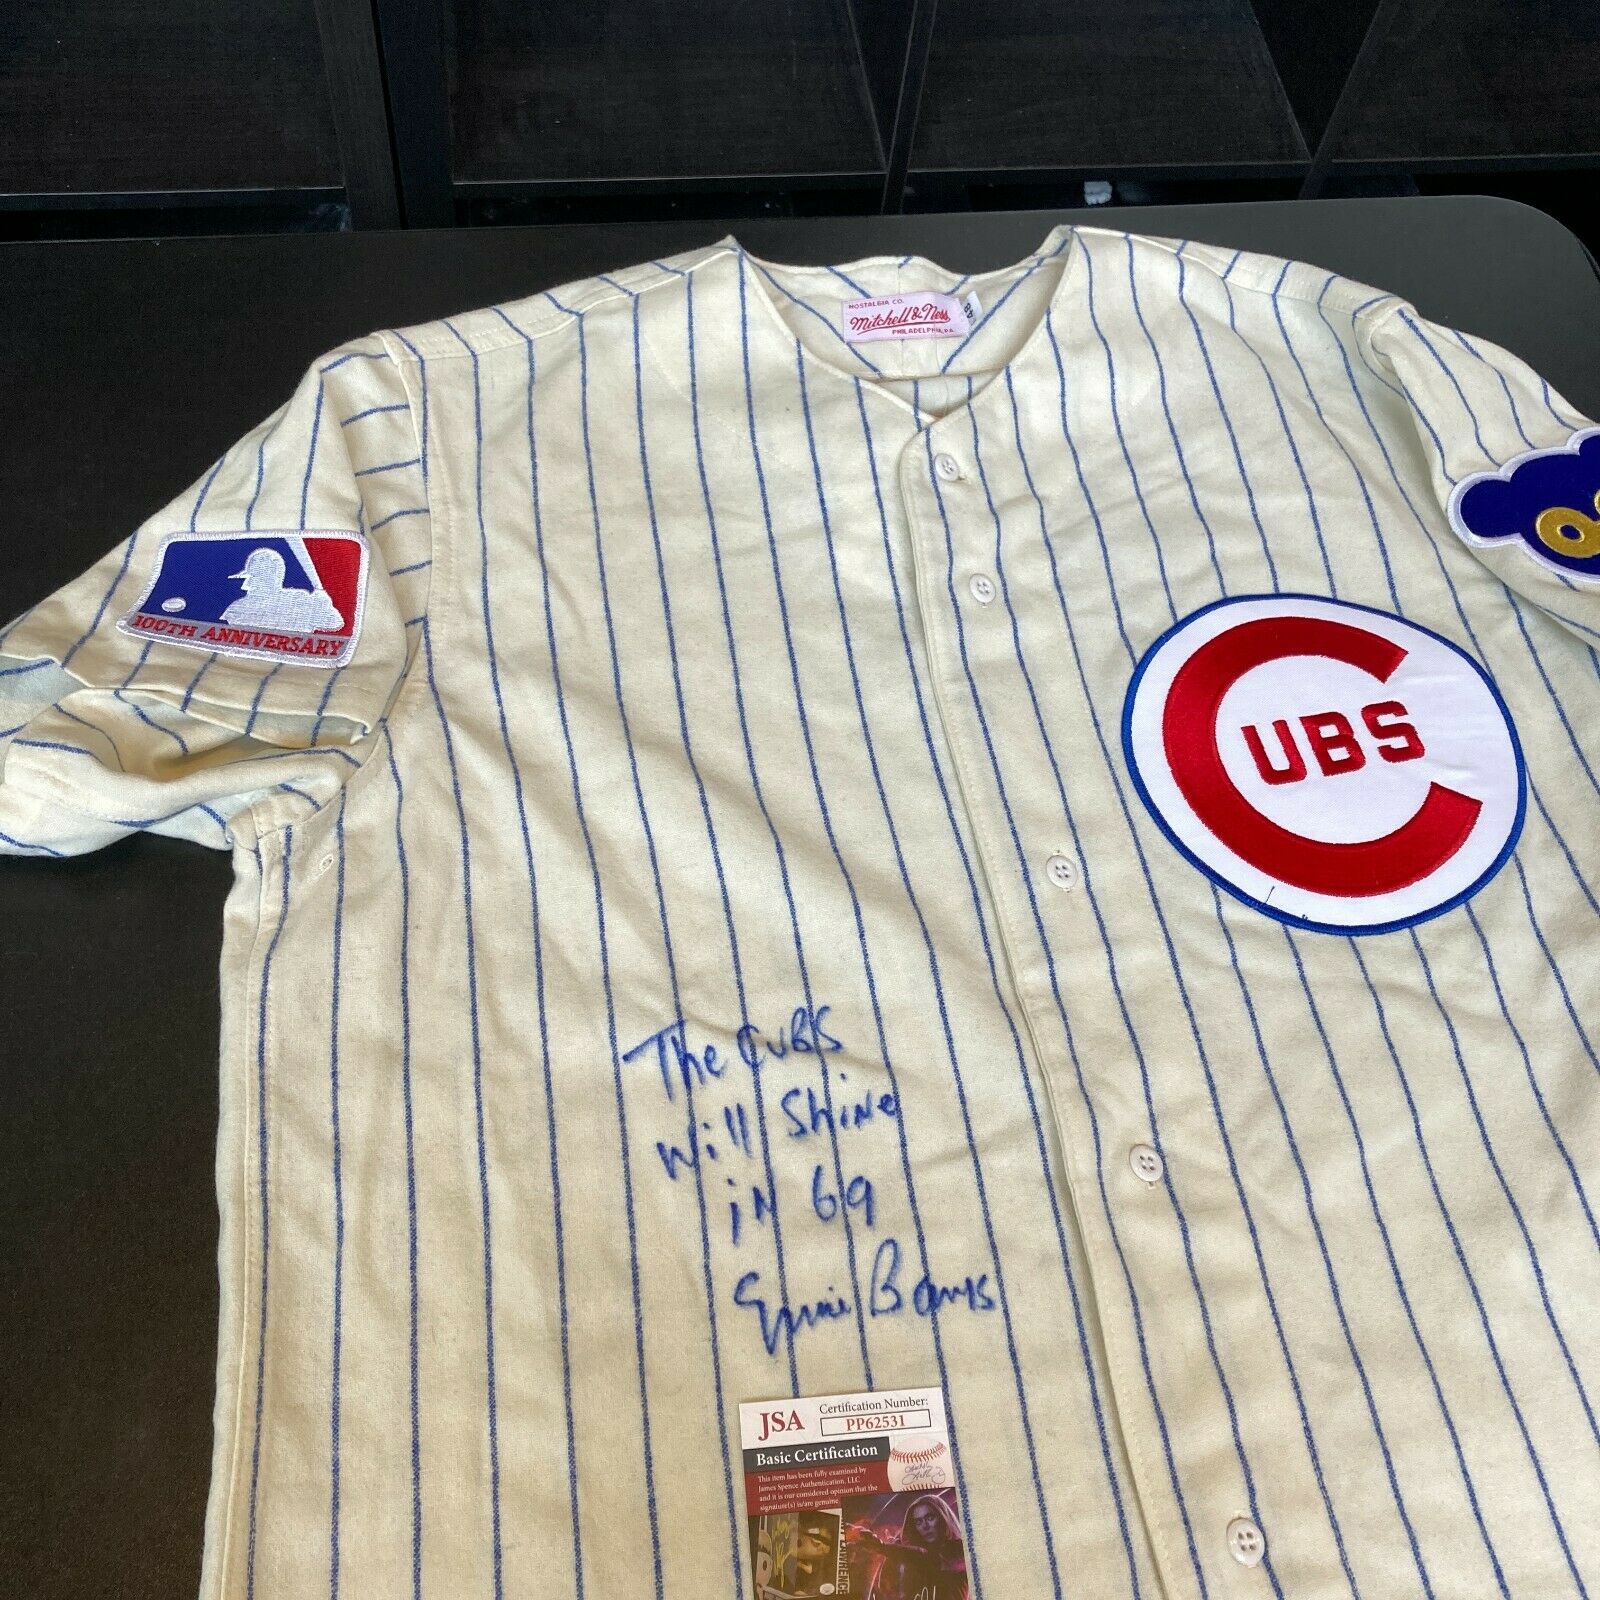 RON SANTO  Chicago Cubs 1969 Away Majestic Throwback Baseball Jersey